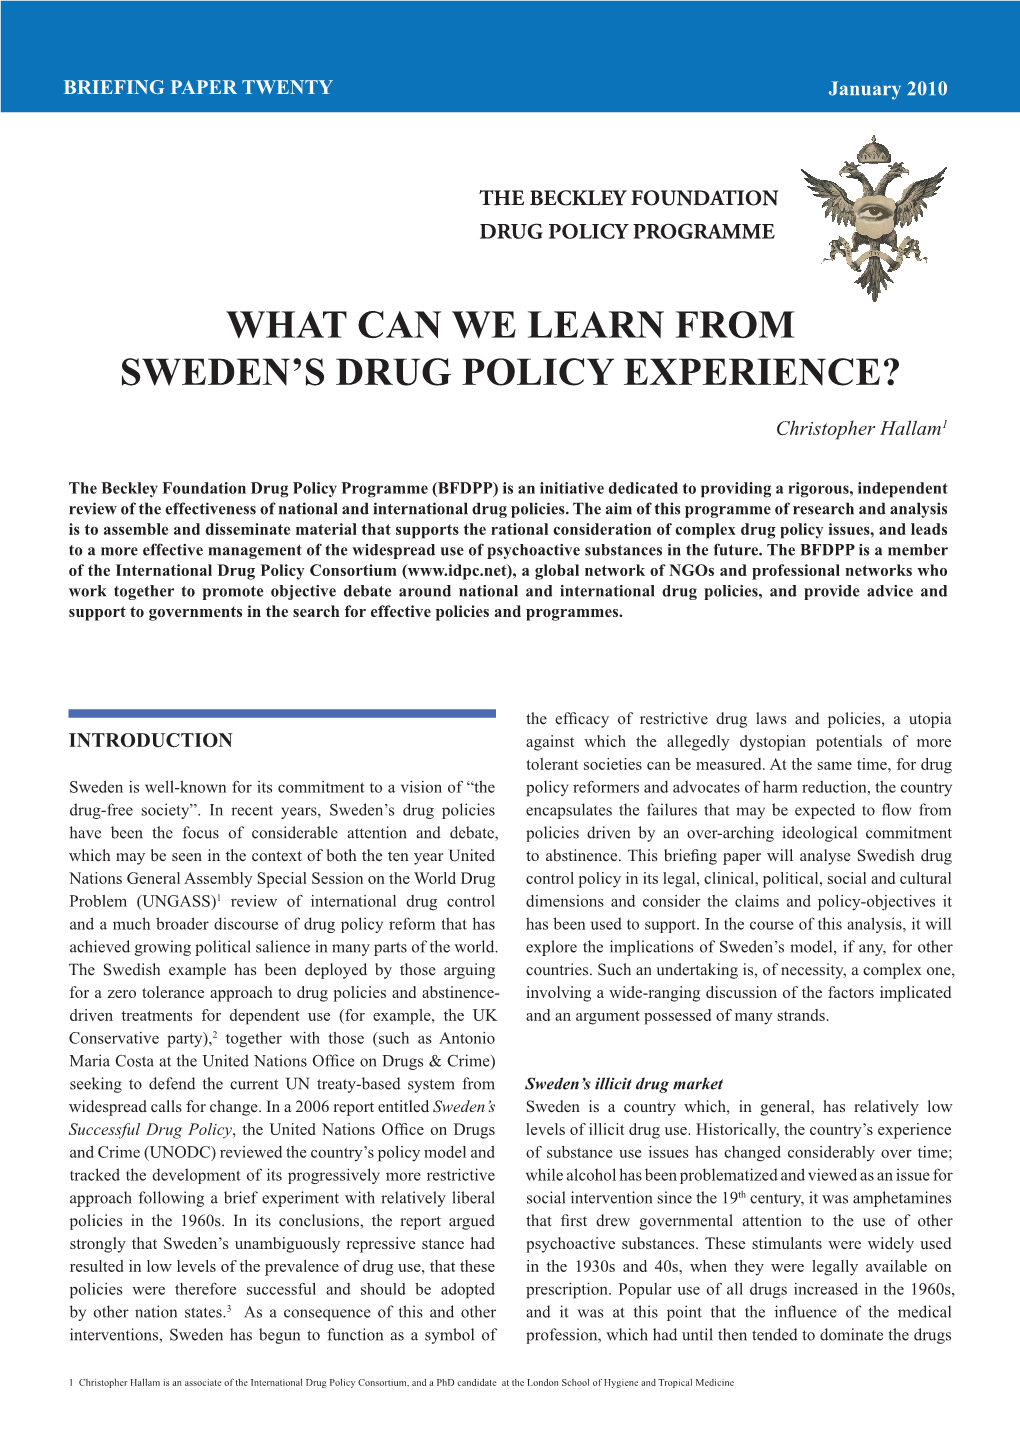 What Can We Learn from Sweden's Drug Policy